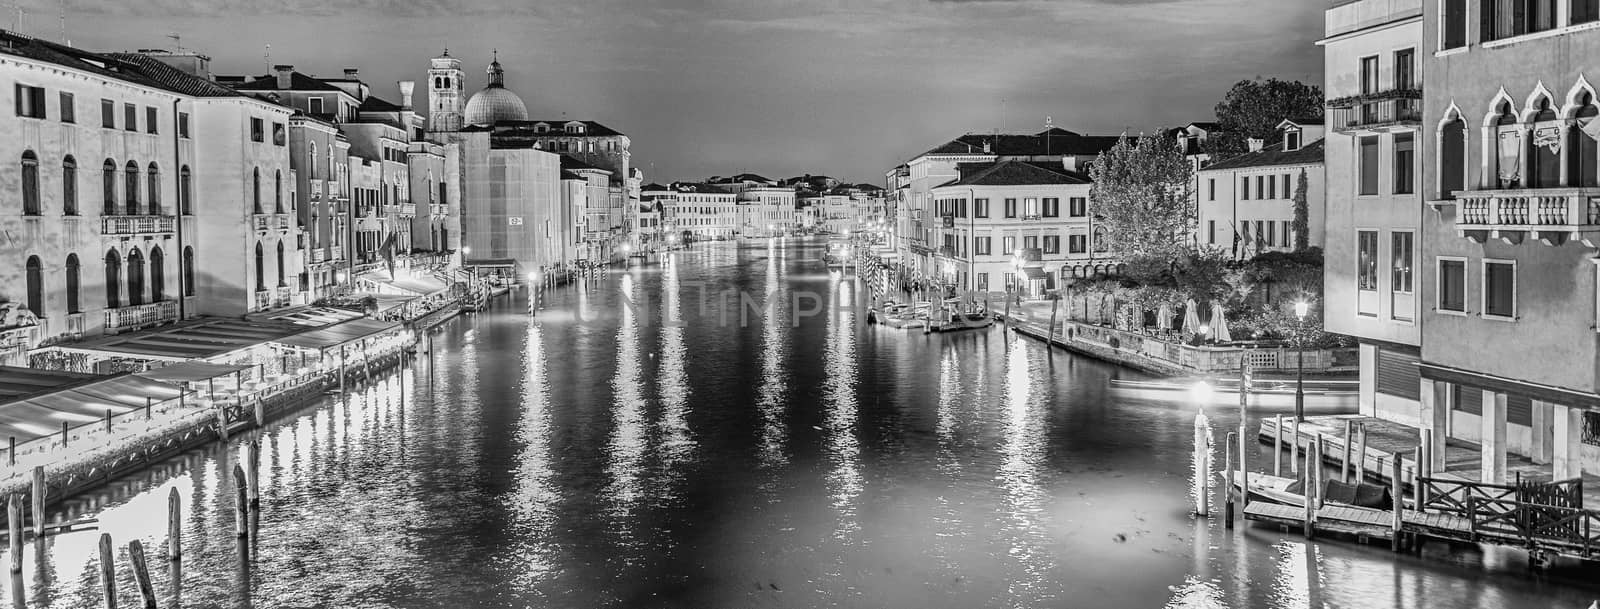 Scenic night view of the Grand Canal in Venice, Italy by marcorubino